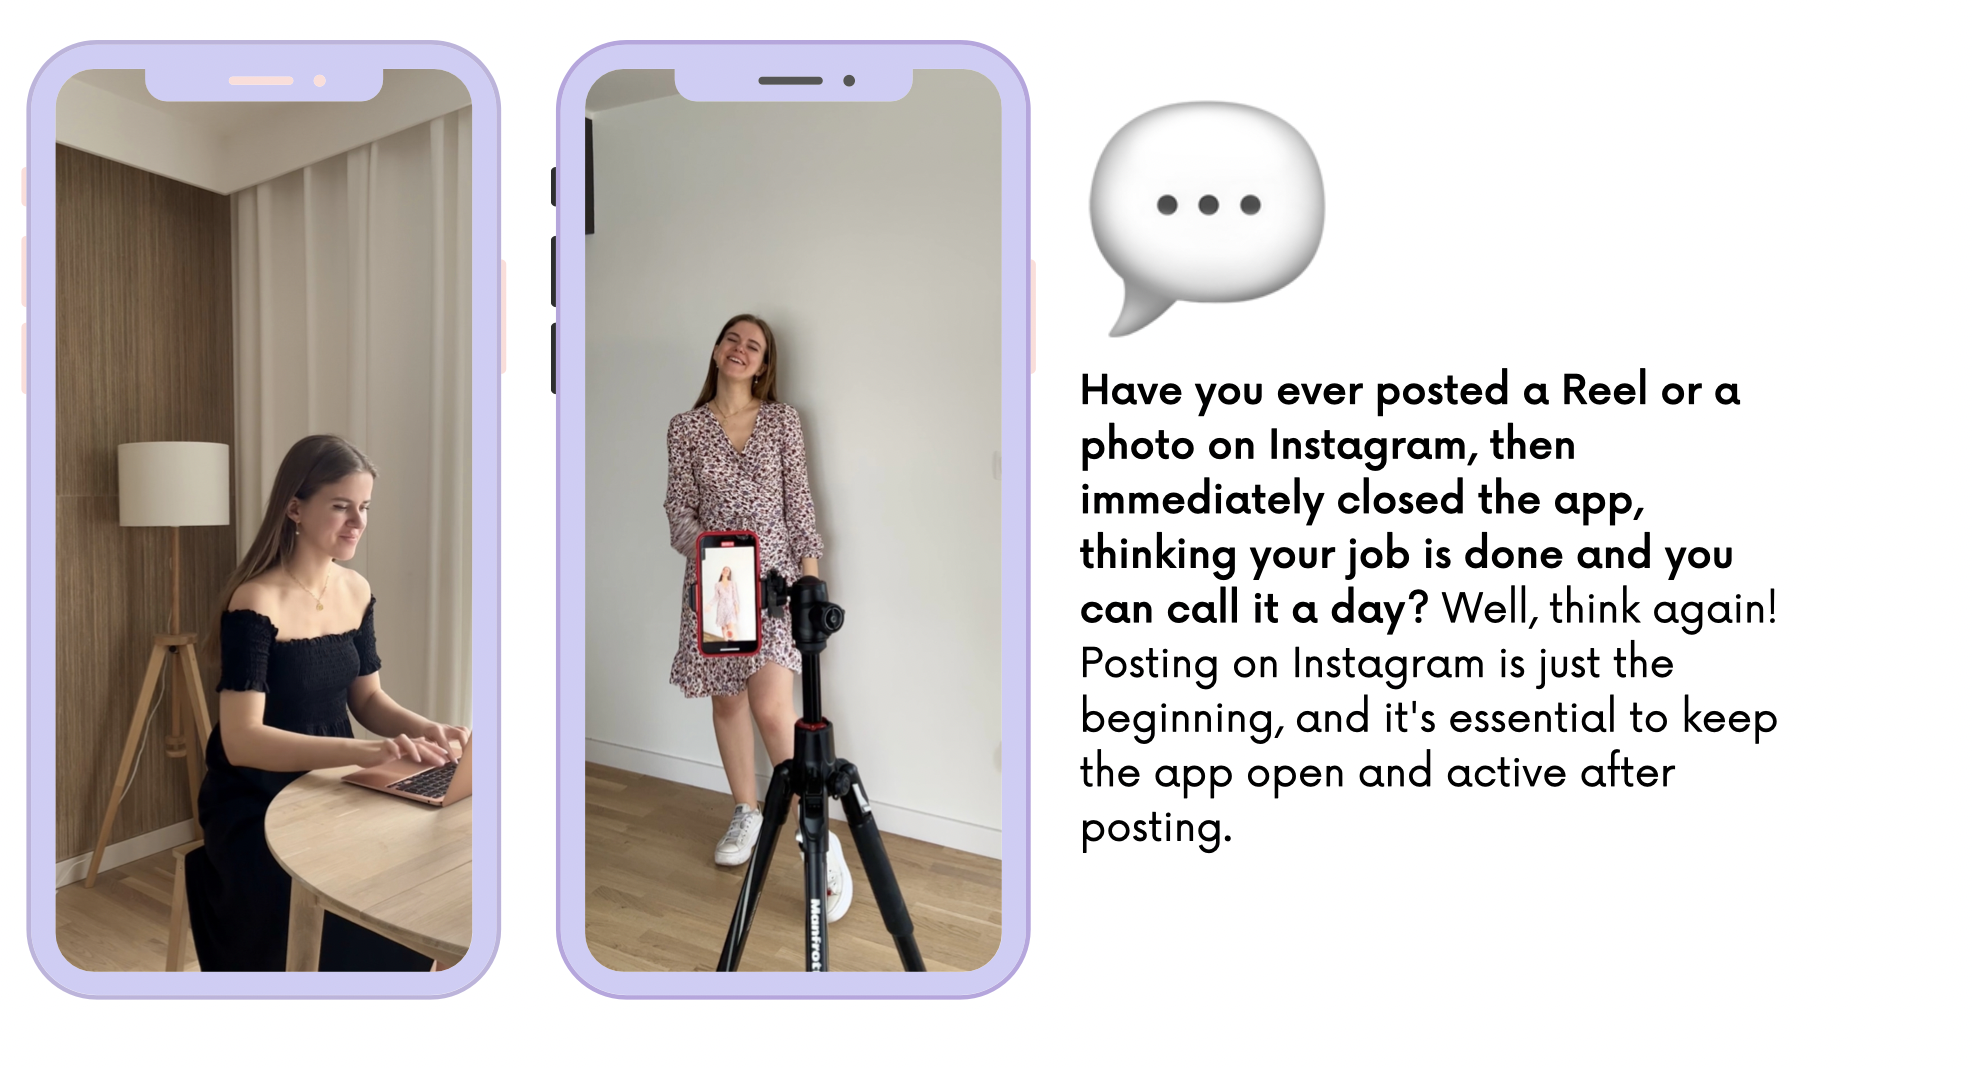 screenshots from instagram app and text about what to do after posting on instagram